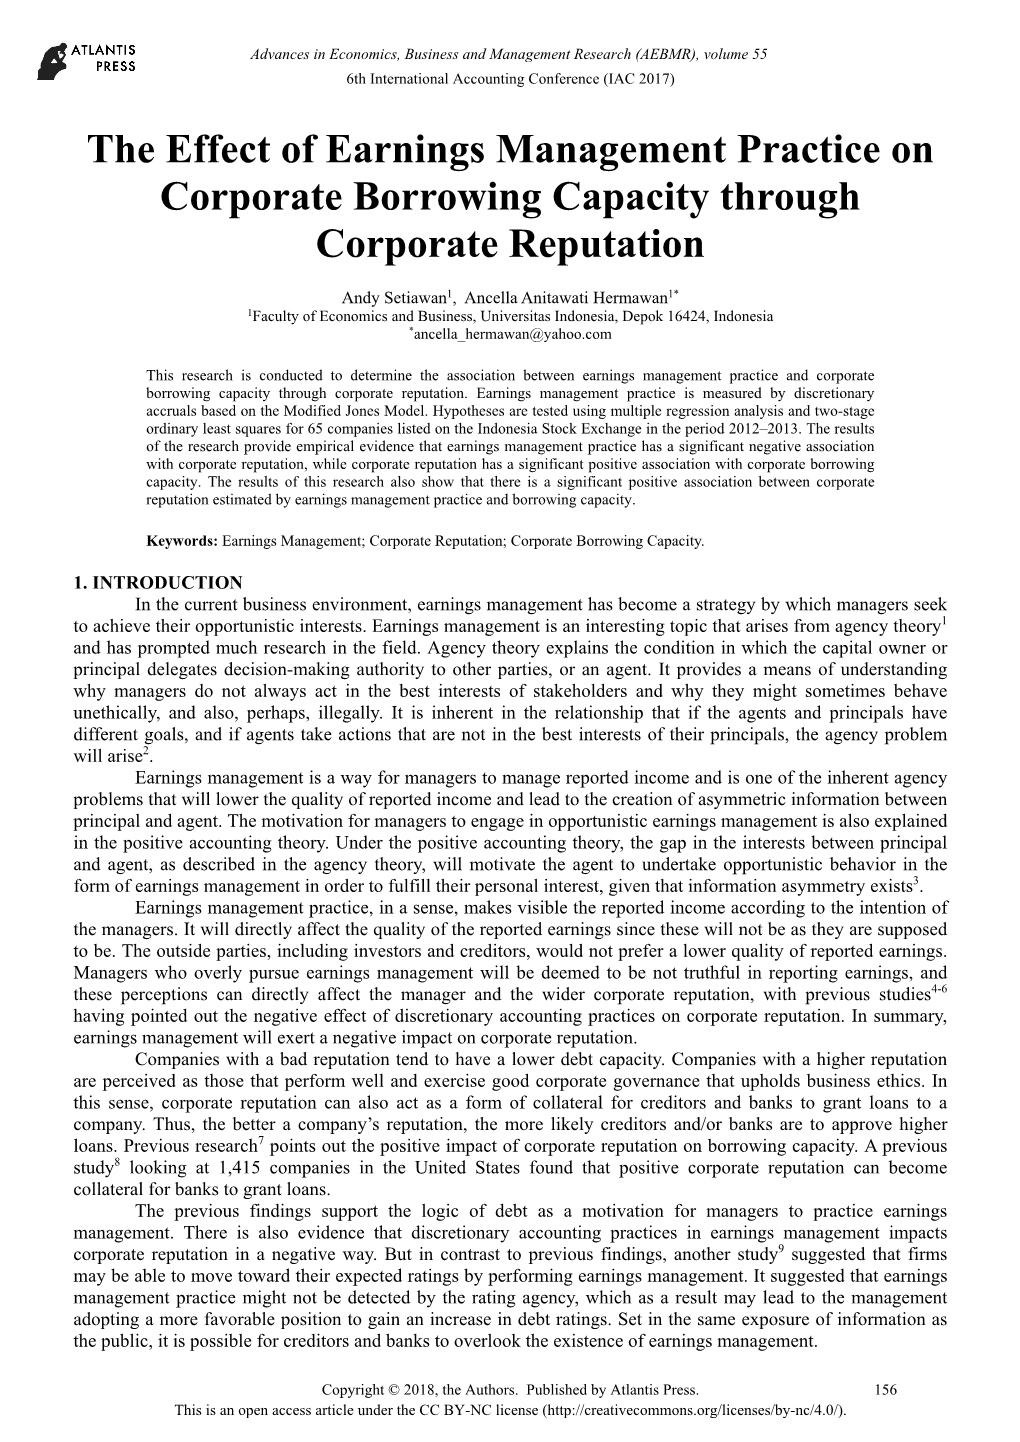 The Effect of Earnings Management Practice on Corporate Borrowing Capacity Through Corporate Reputation